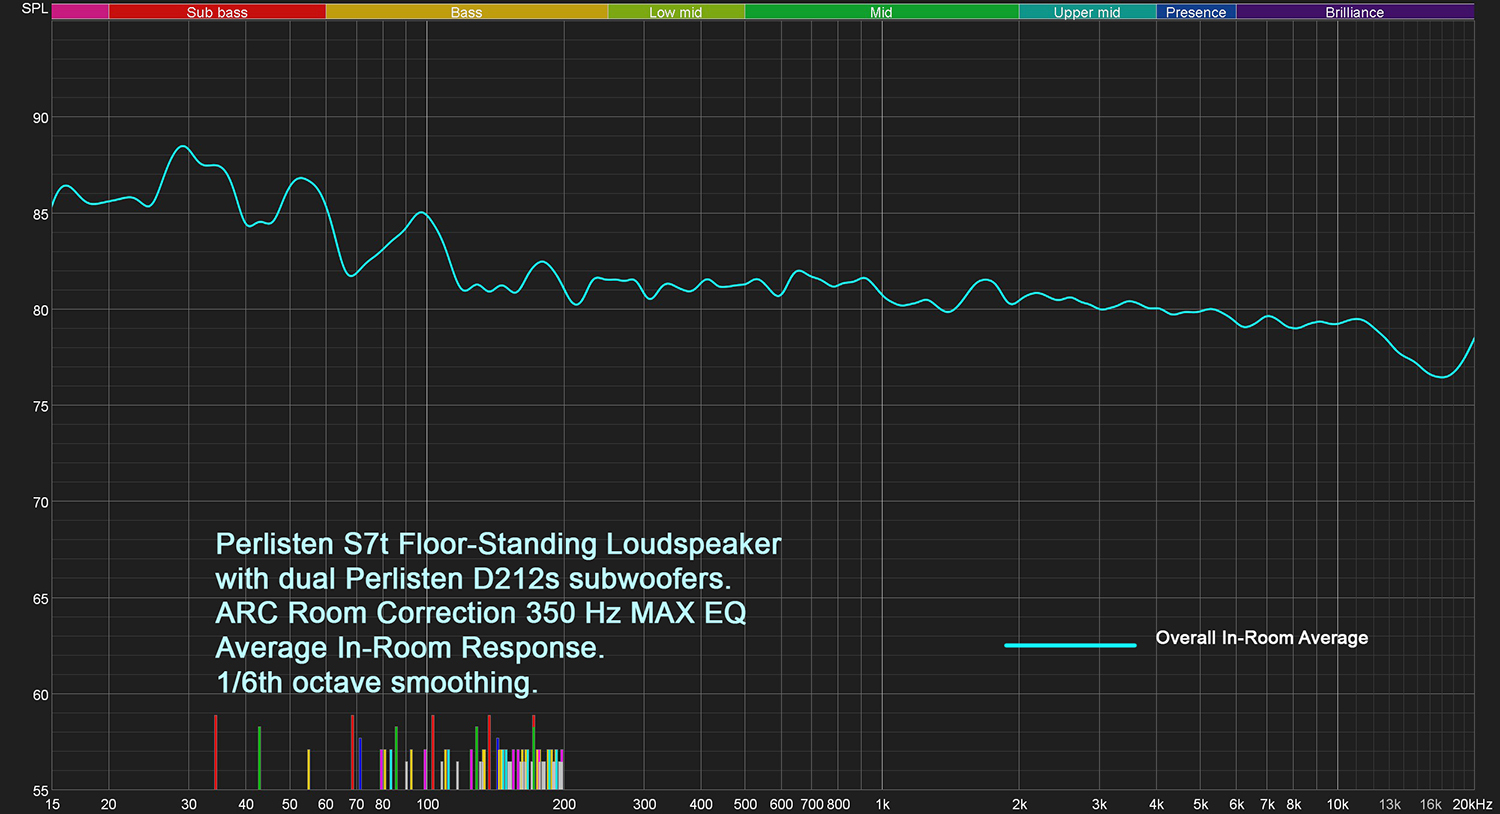 Perlisten S7t and dual D212s subwoofers, Averaged In-Room Response with ARC, MAX 350 EQ